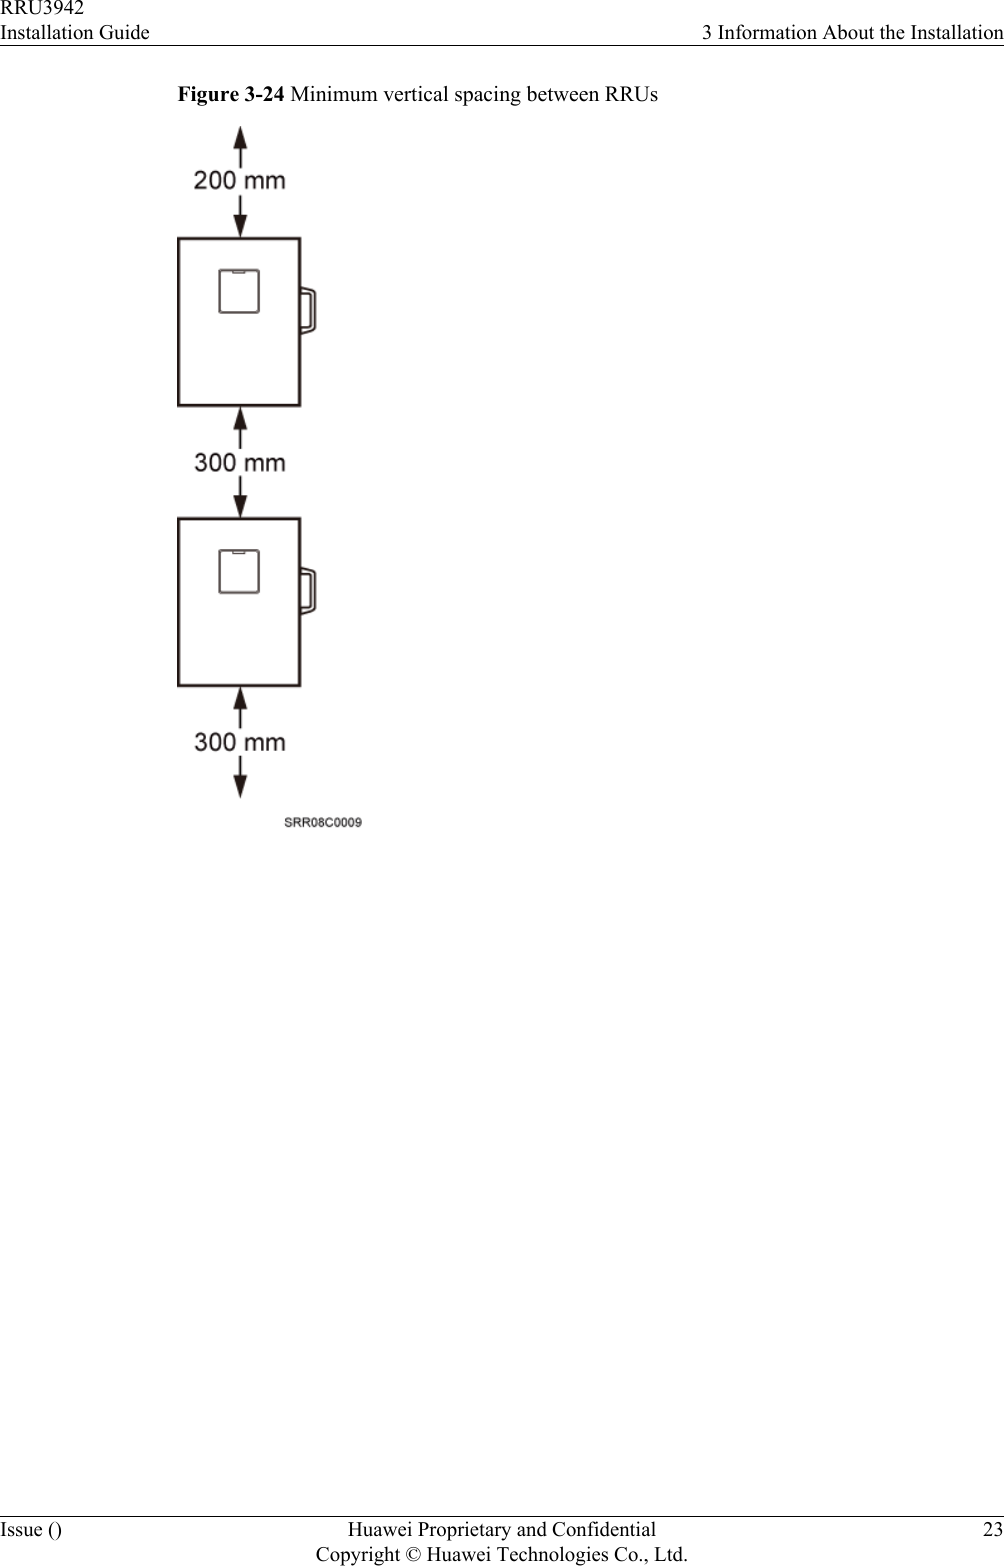 Figure 3-24 Minimum vertical spacing between RRUsRRU3942Installation Guide 3 Information About the InstallationIssue () Huawei Proprietary and ConfidentialCopyright © Huawei Technologies Co., Ltd.23